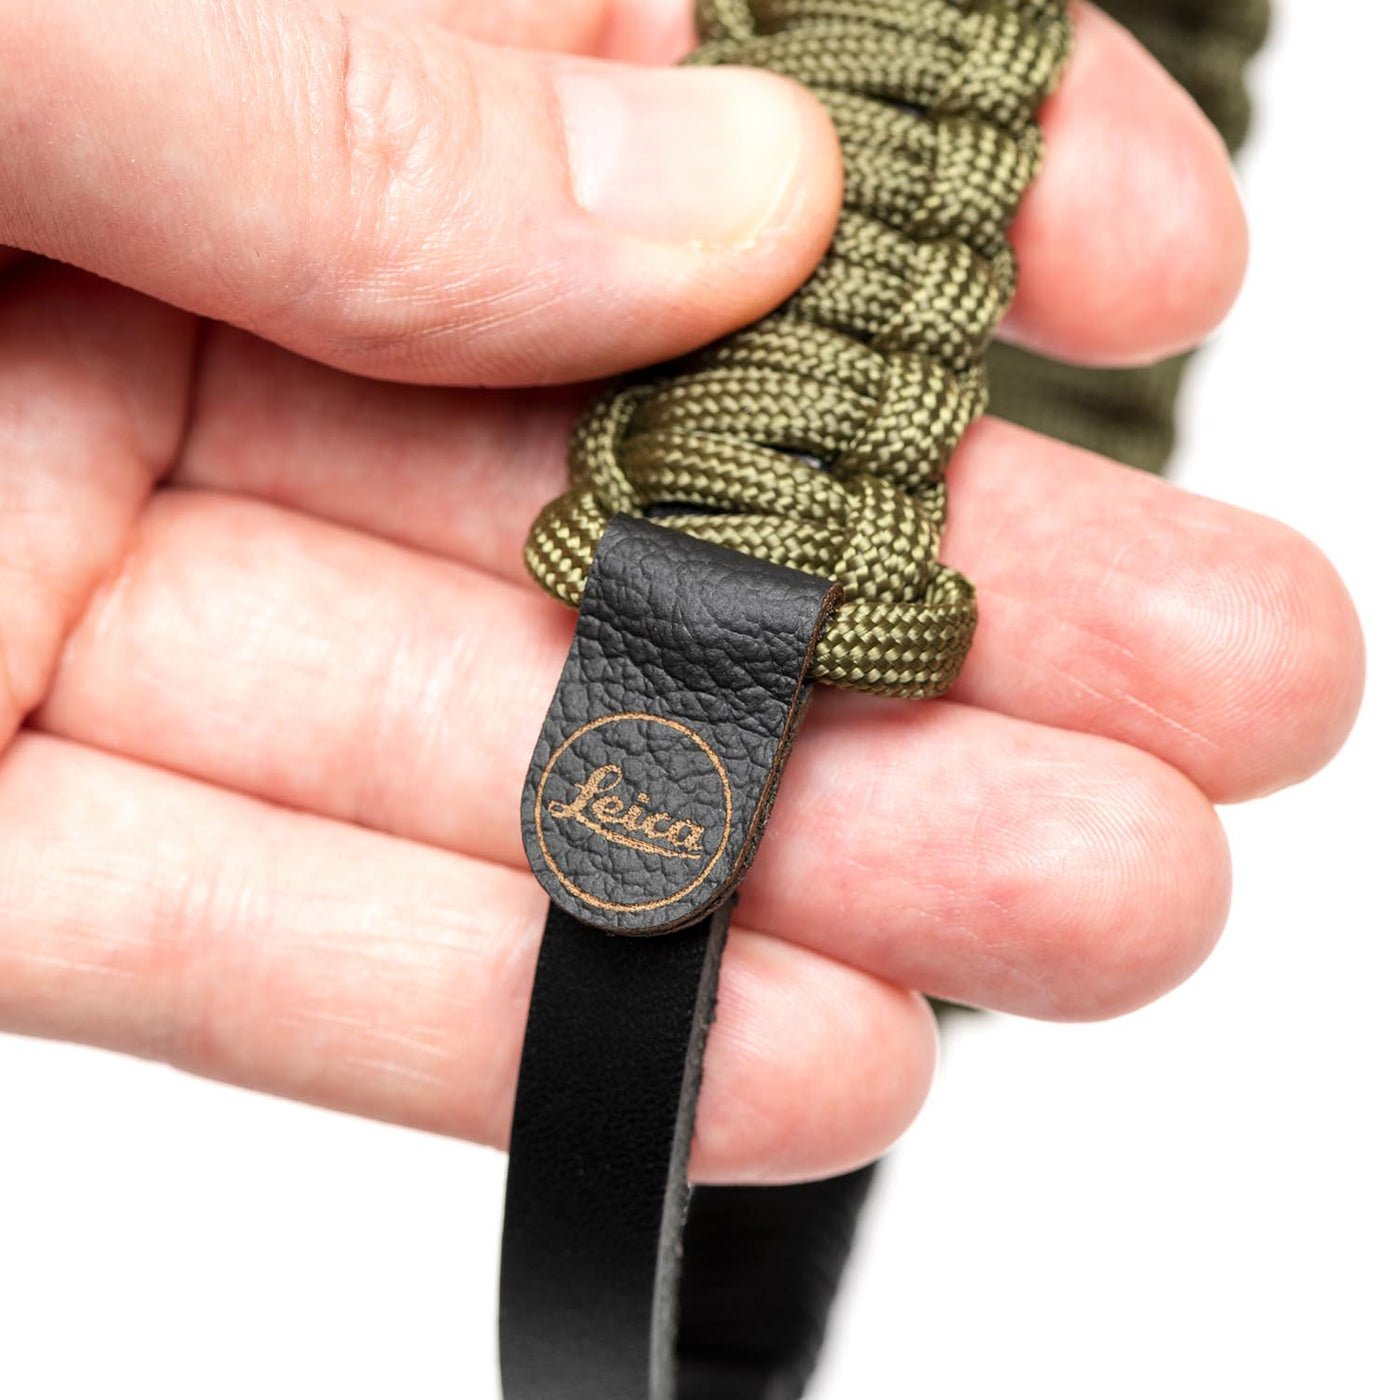 Leather end of Leica Paracord Hand Strap 